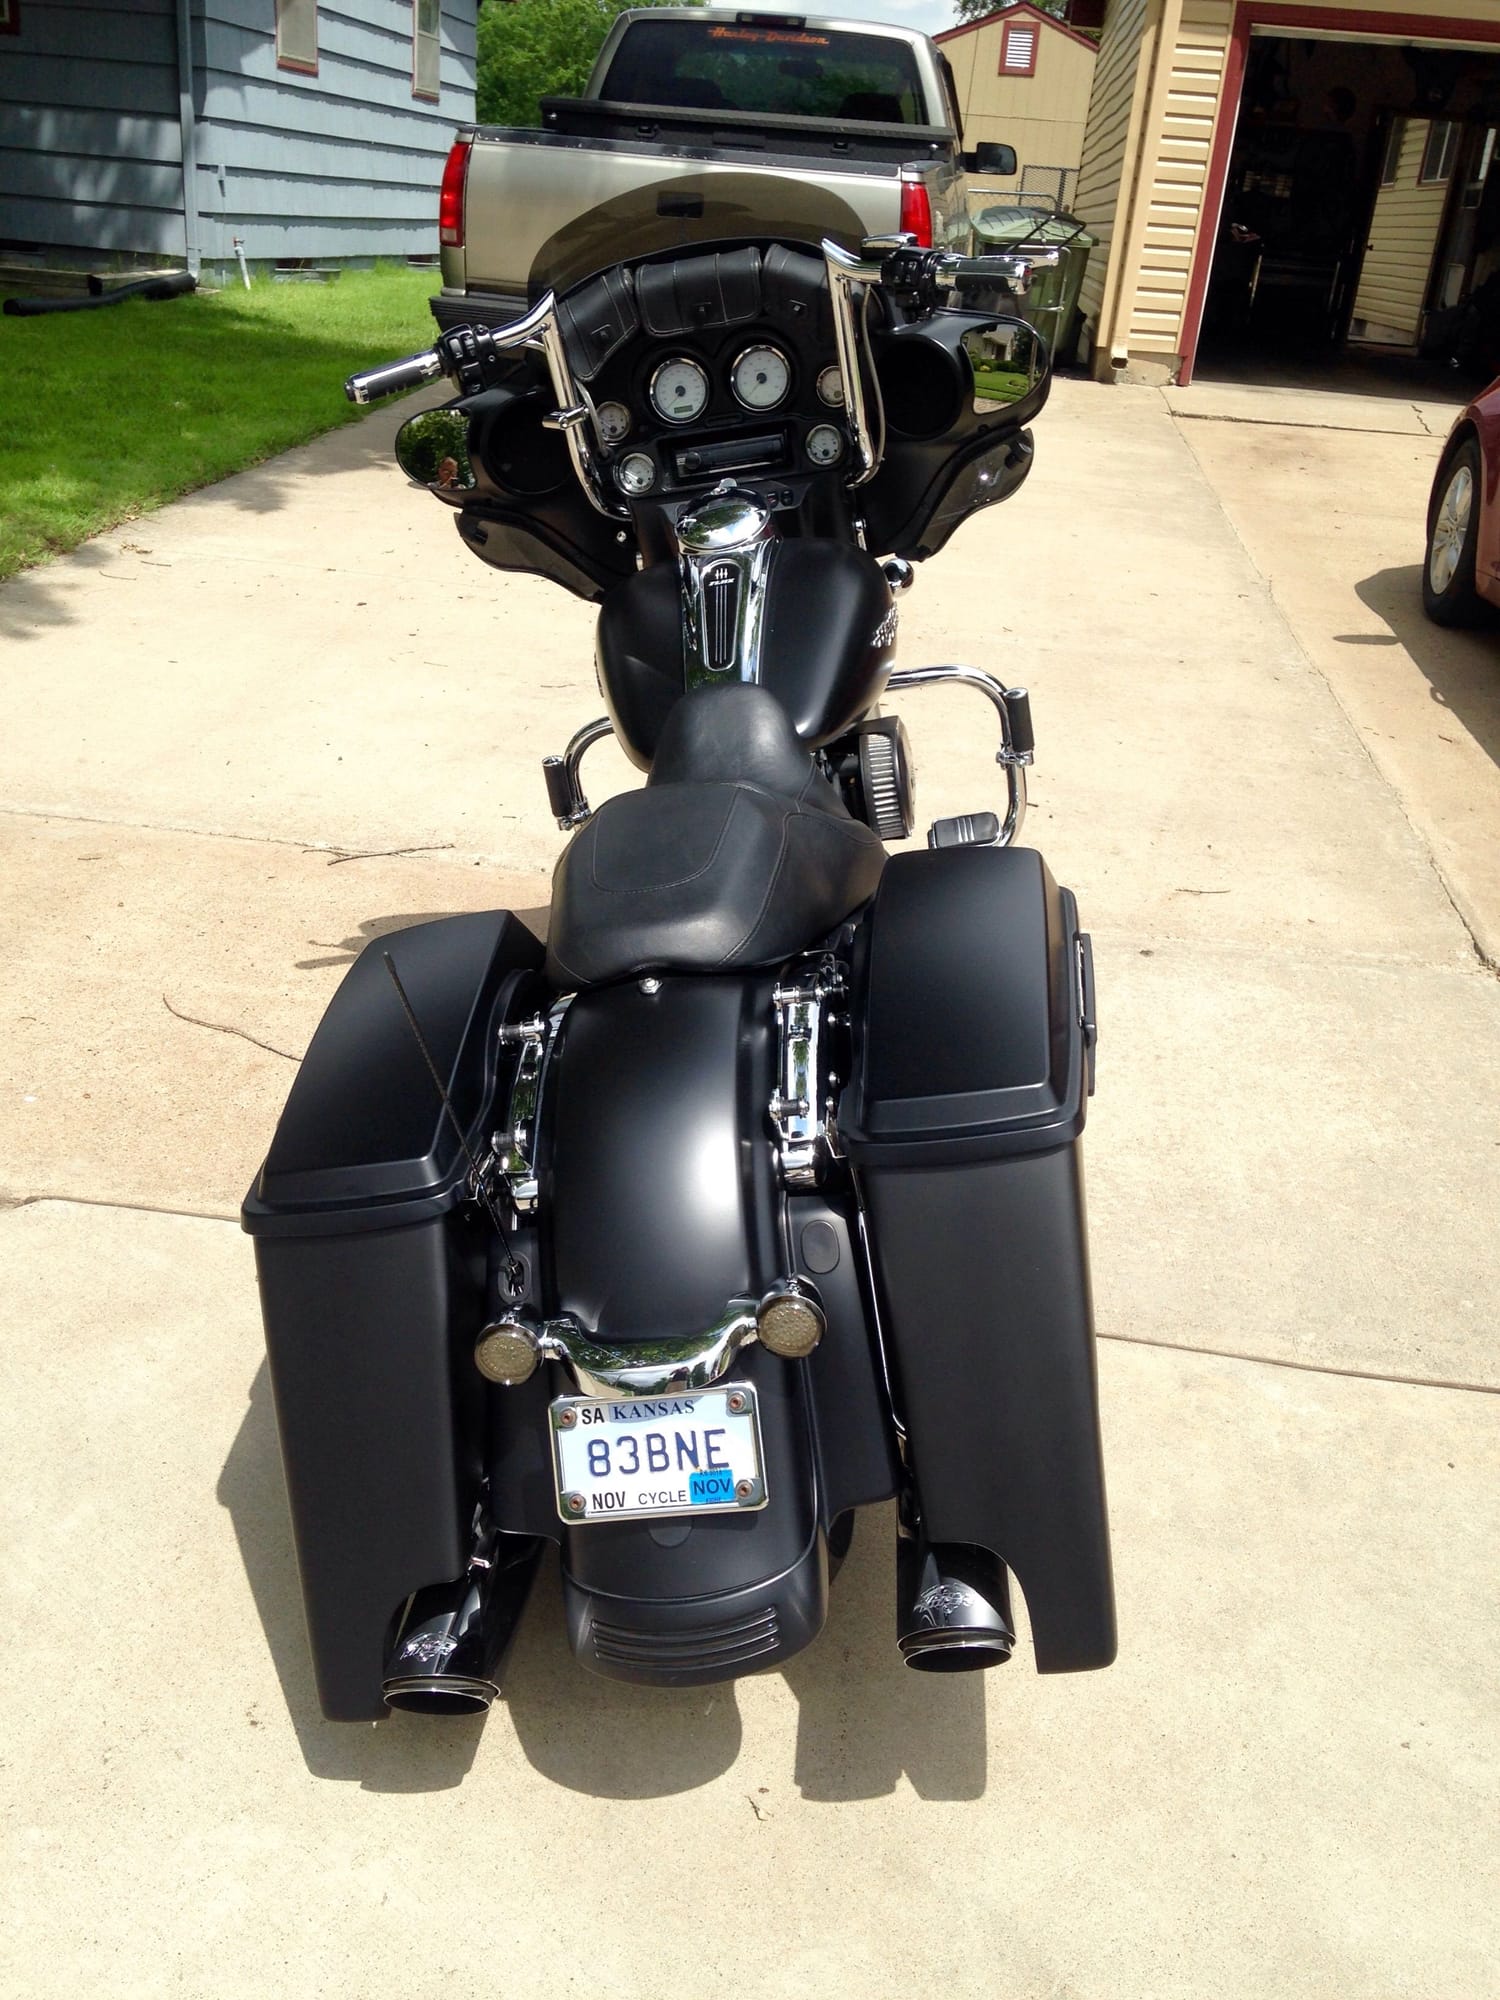 Extended bags - Harley Davidson Forums